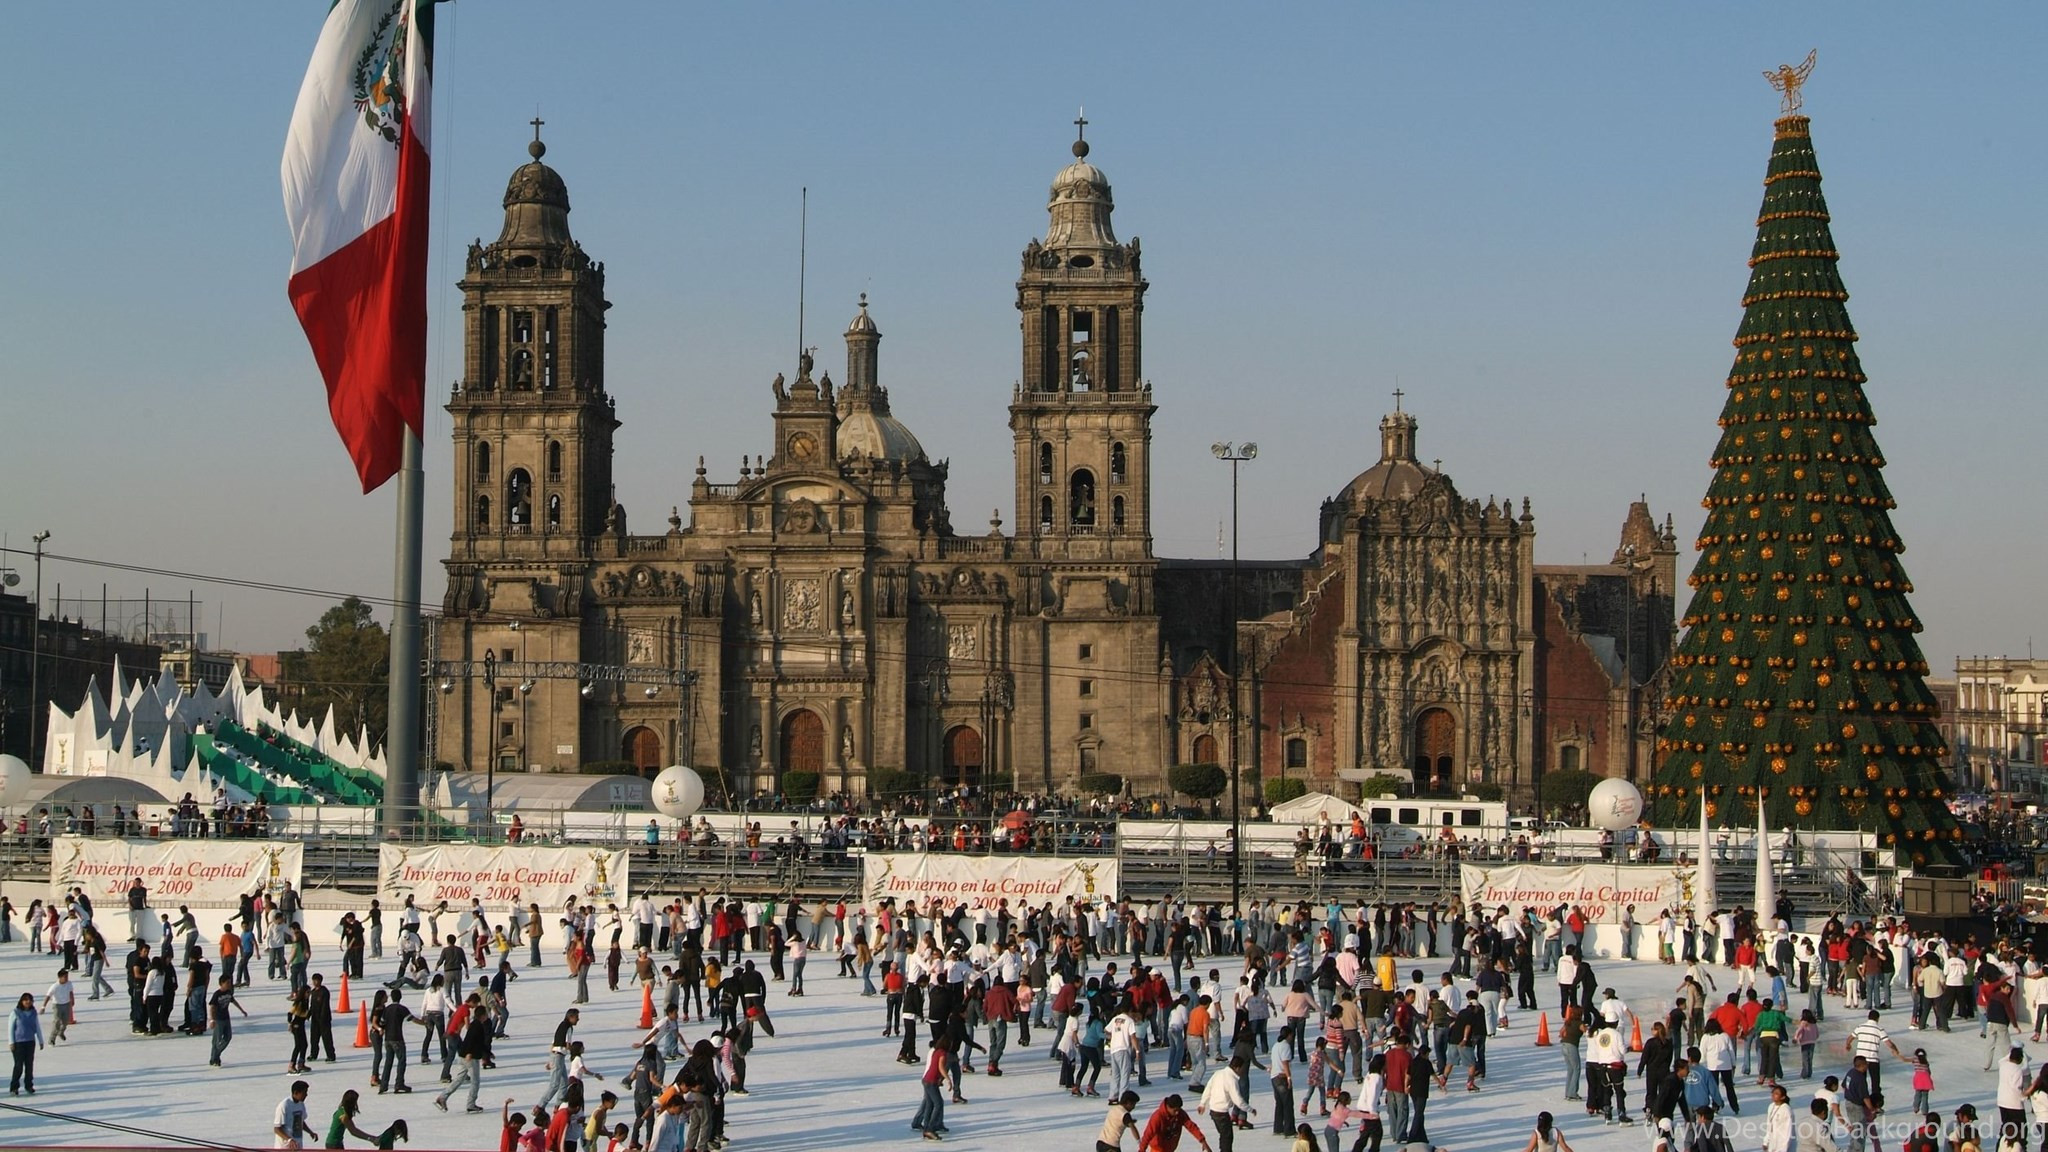 2048x1152 Mexico City Wallpaper Outstanding Mexico City Wallpapers Hd S and Desktop